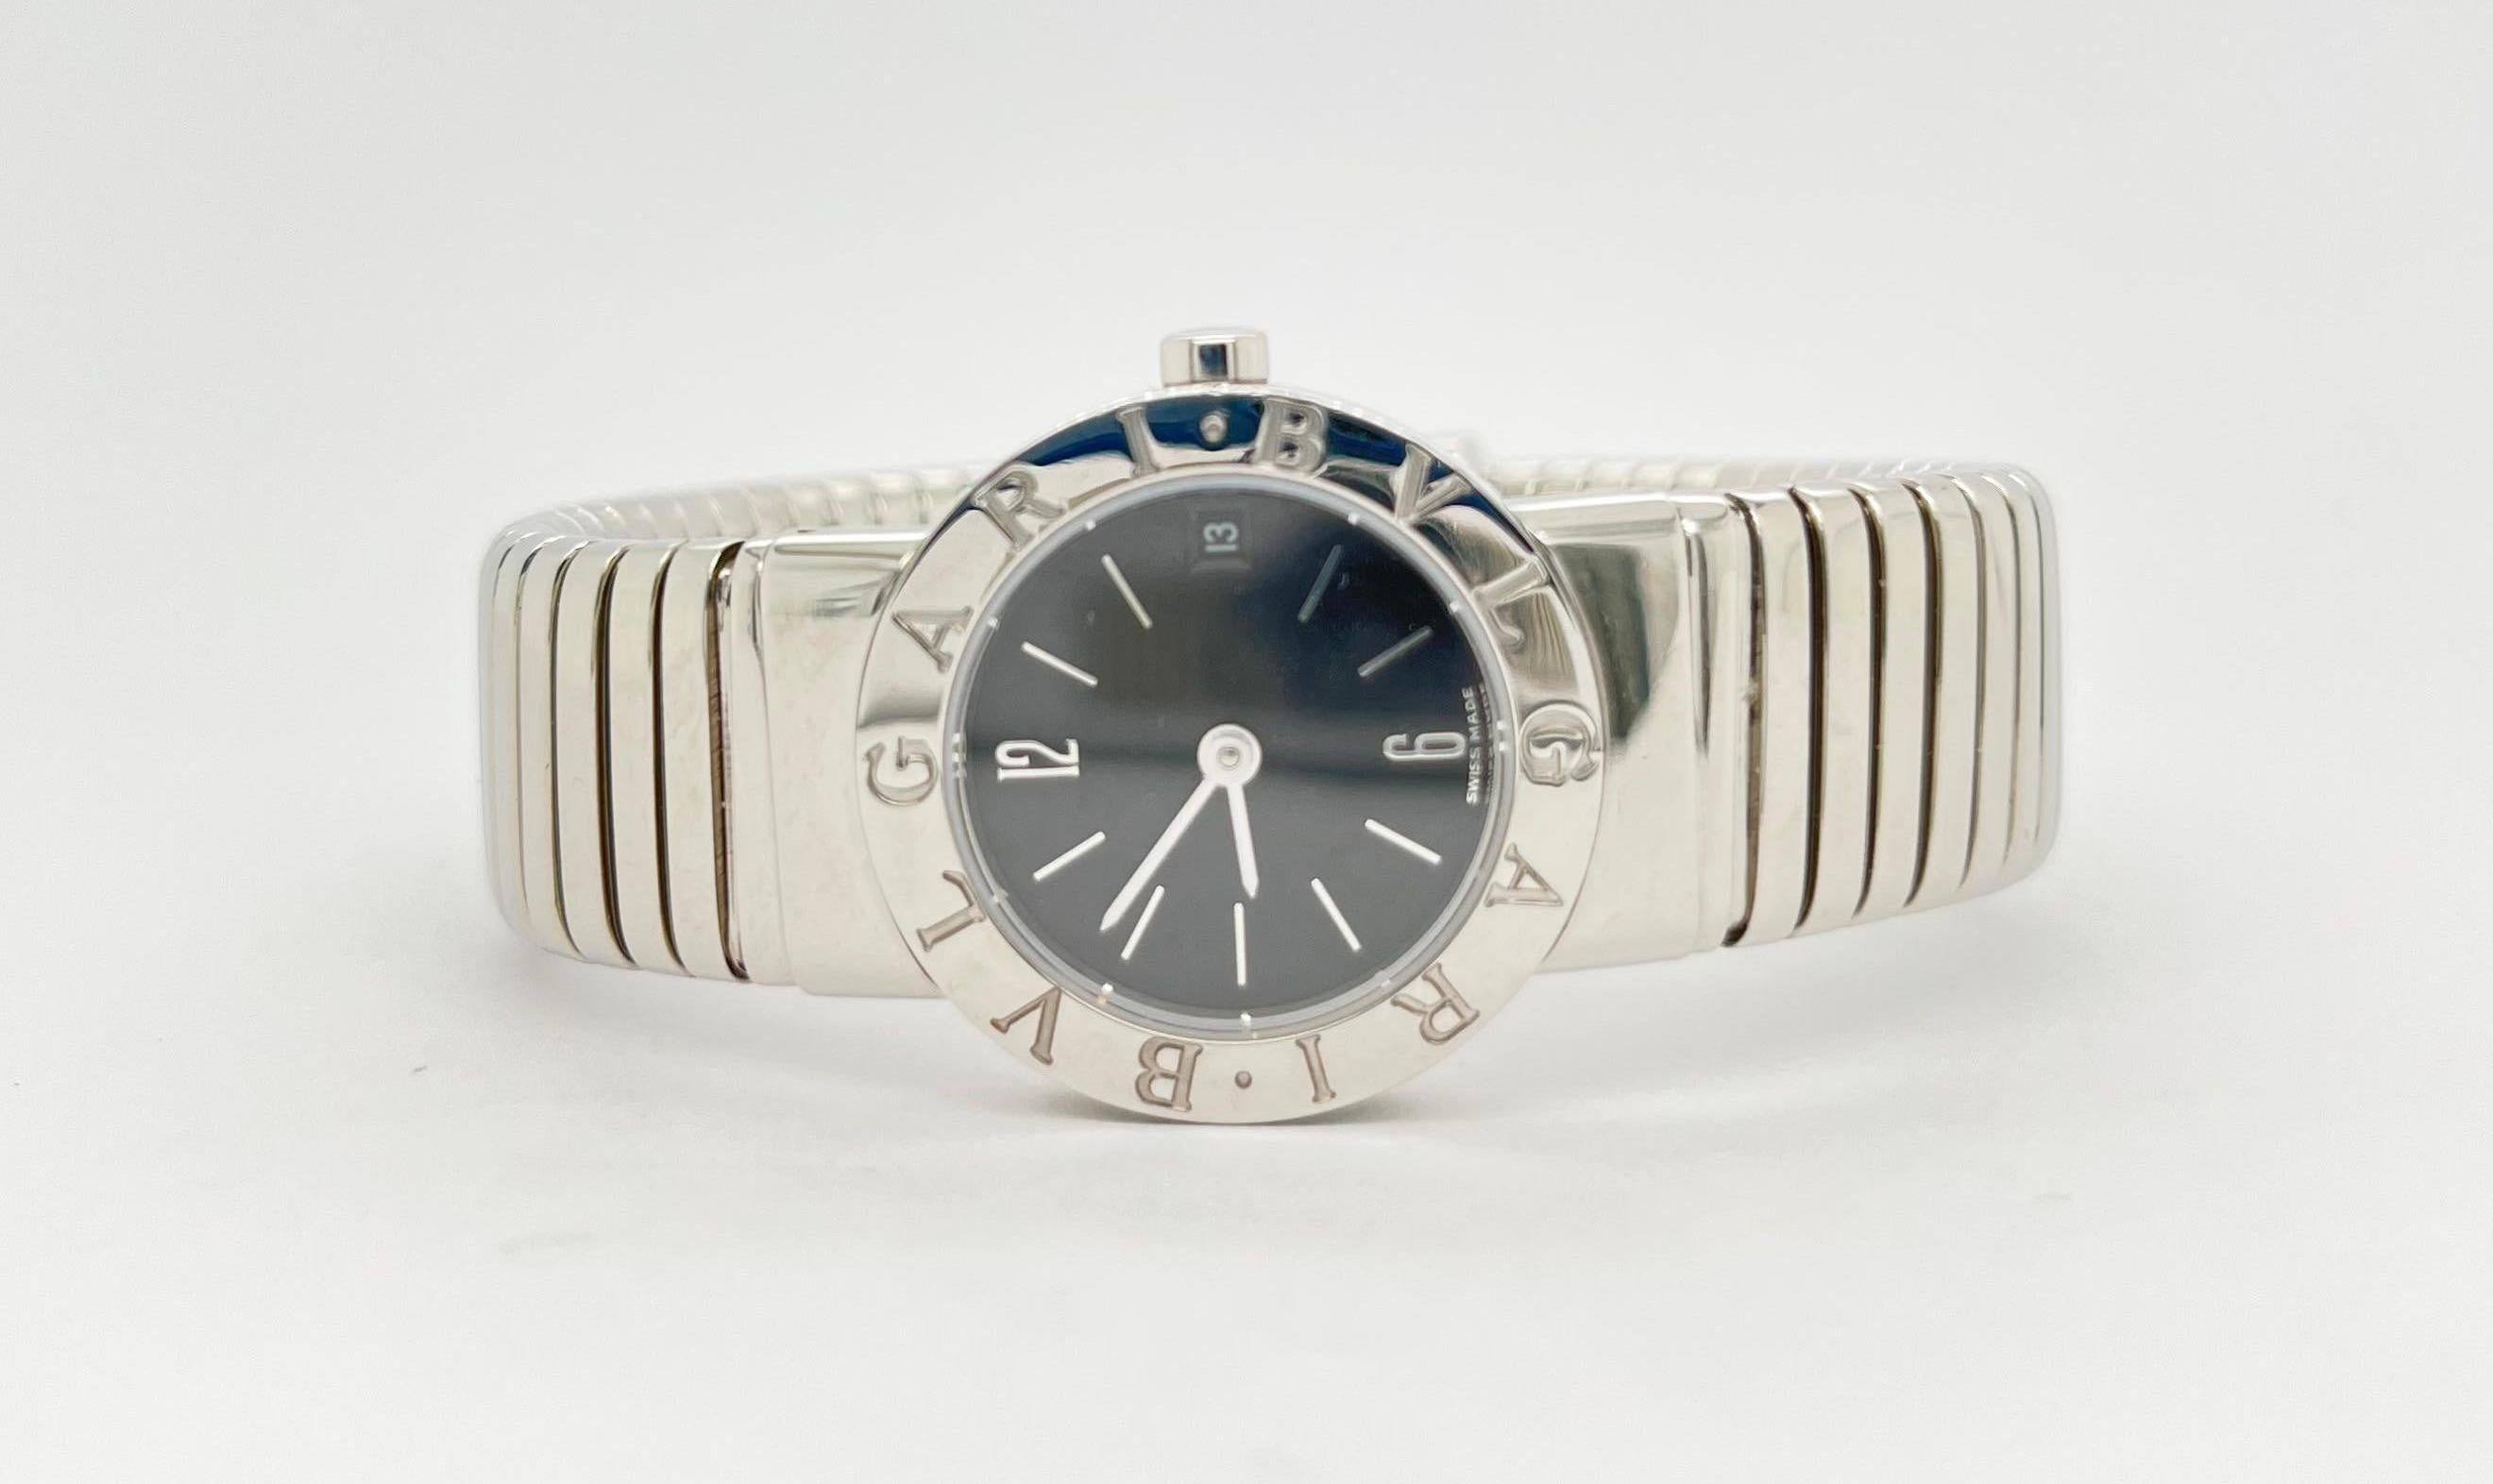 Bulgari Tubogas Ladies wristwatch w/black dial and sapphire crystal top, quartz movement, will fit a wrist up to 6.25 inches. Dial diameter: 23 x 23 mm
Marked:BULGARI BB 23 2T S
weight: 50.3 g
Circa 1990'
